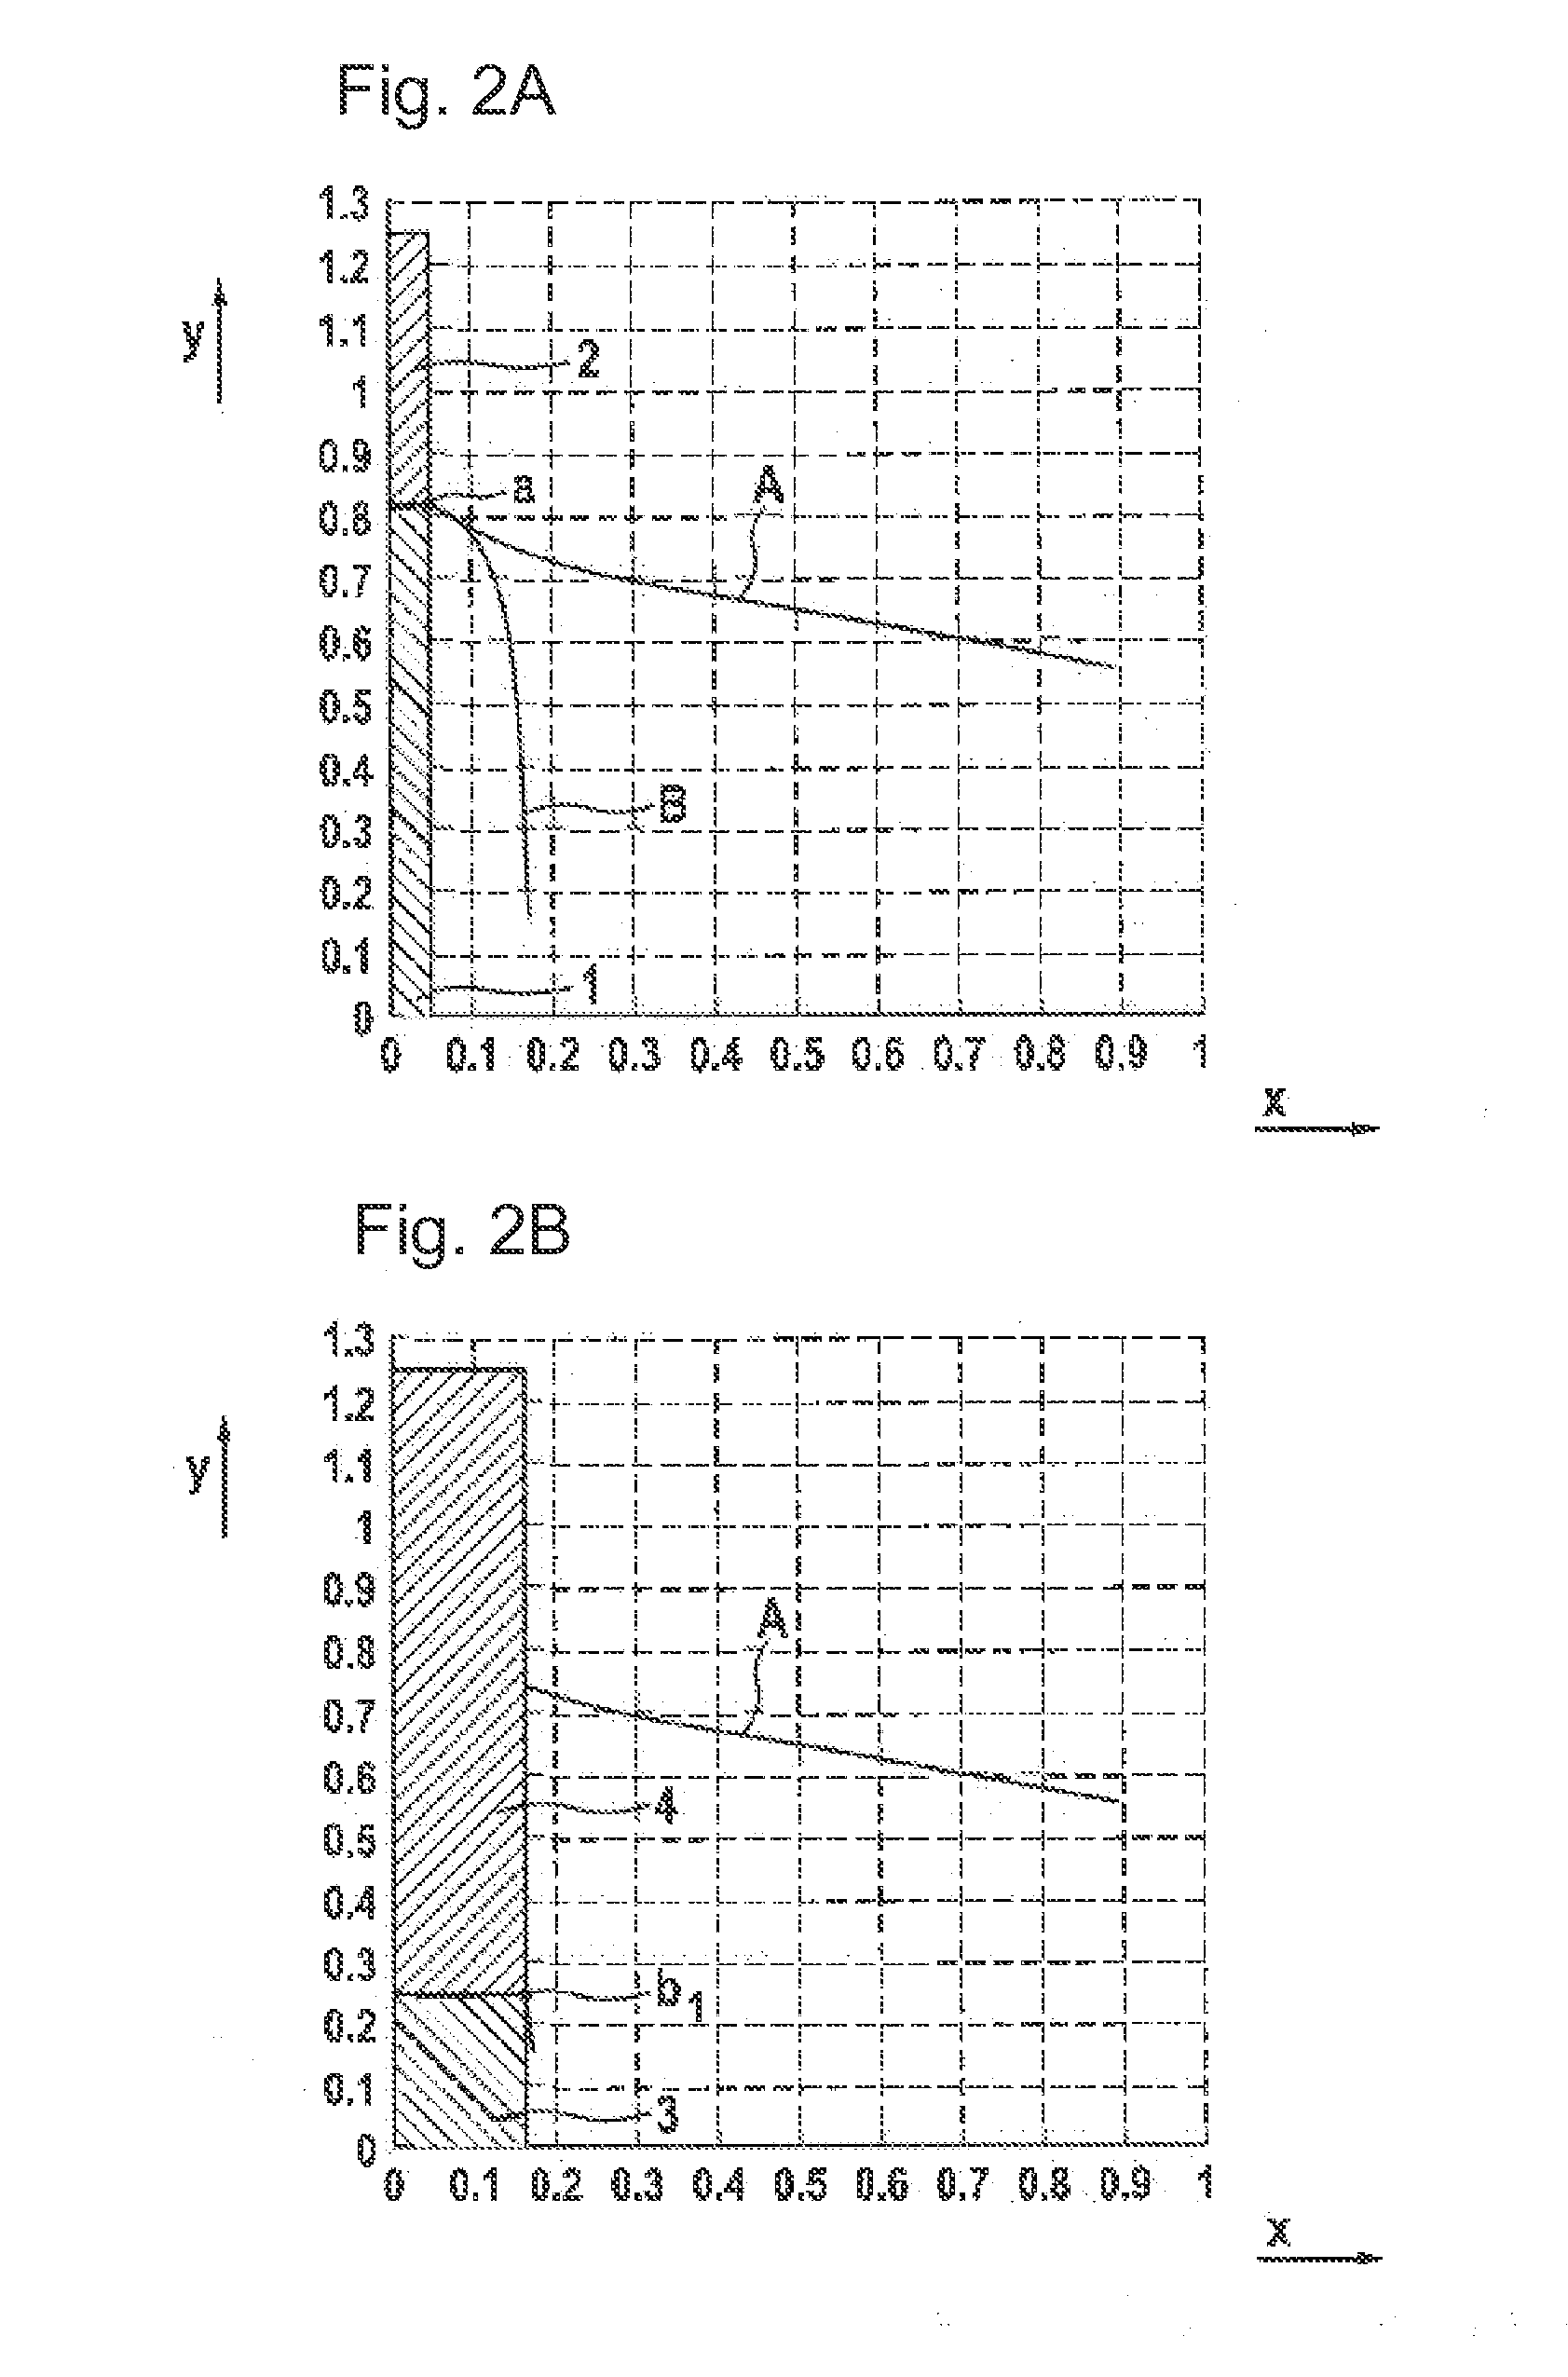 Method for operating a fuel cell and fuel cell system with improved thermal control